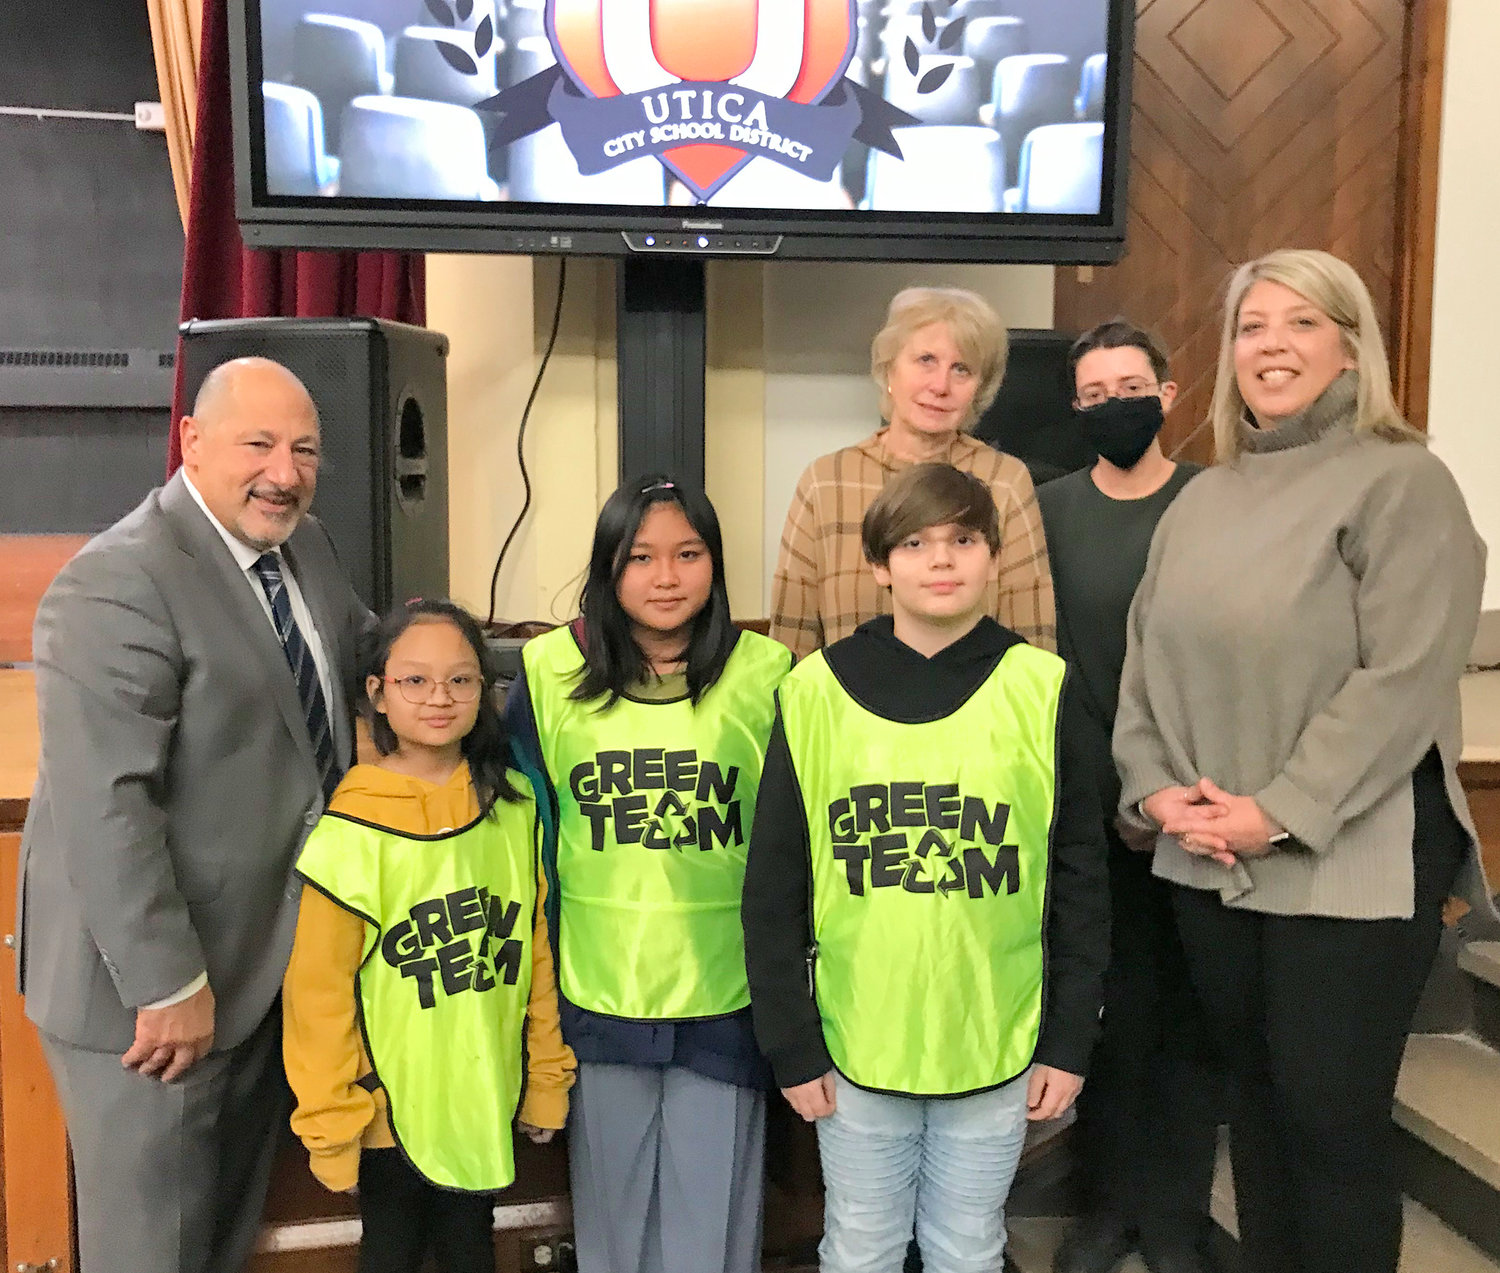 Members of the Conkling Elementary School Green team and their advisors pose Dec. 13 with Utica City Schools Board of Education President Joseph Hobika Jr., left, during the board's meeting at the Kernan Elementary School in Utica.